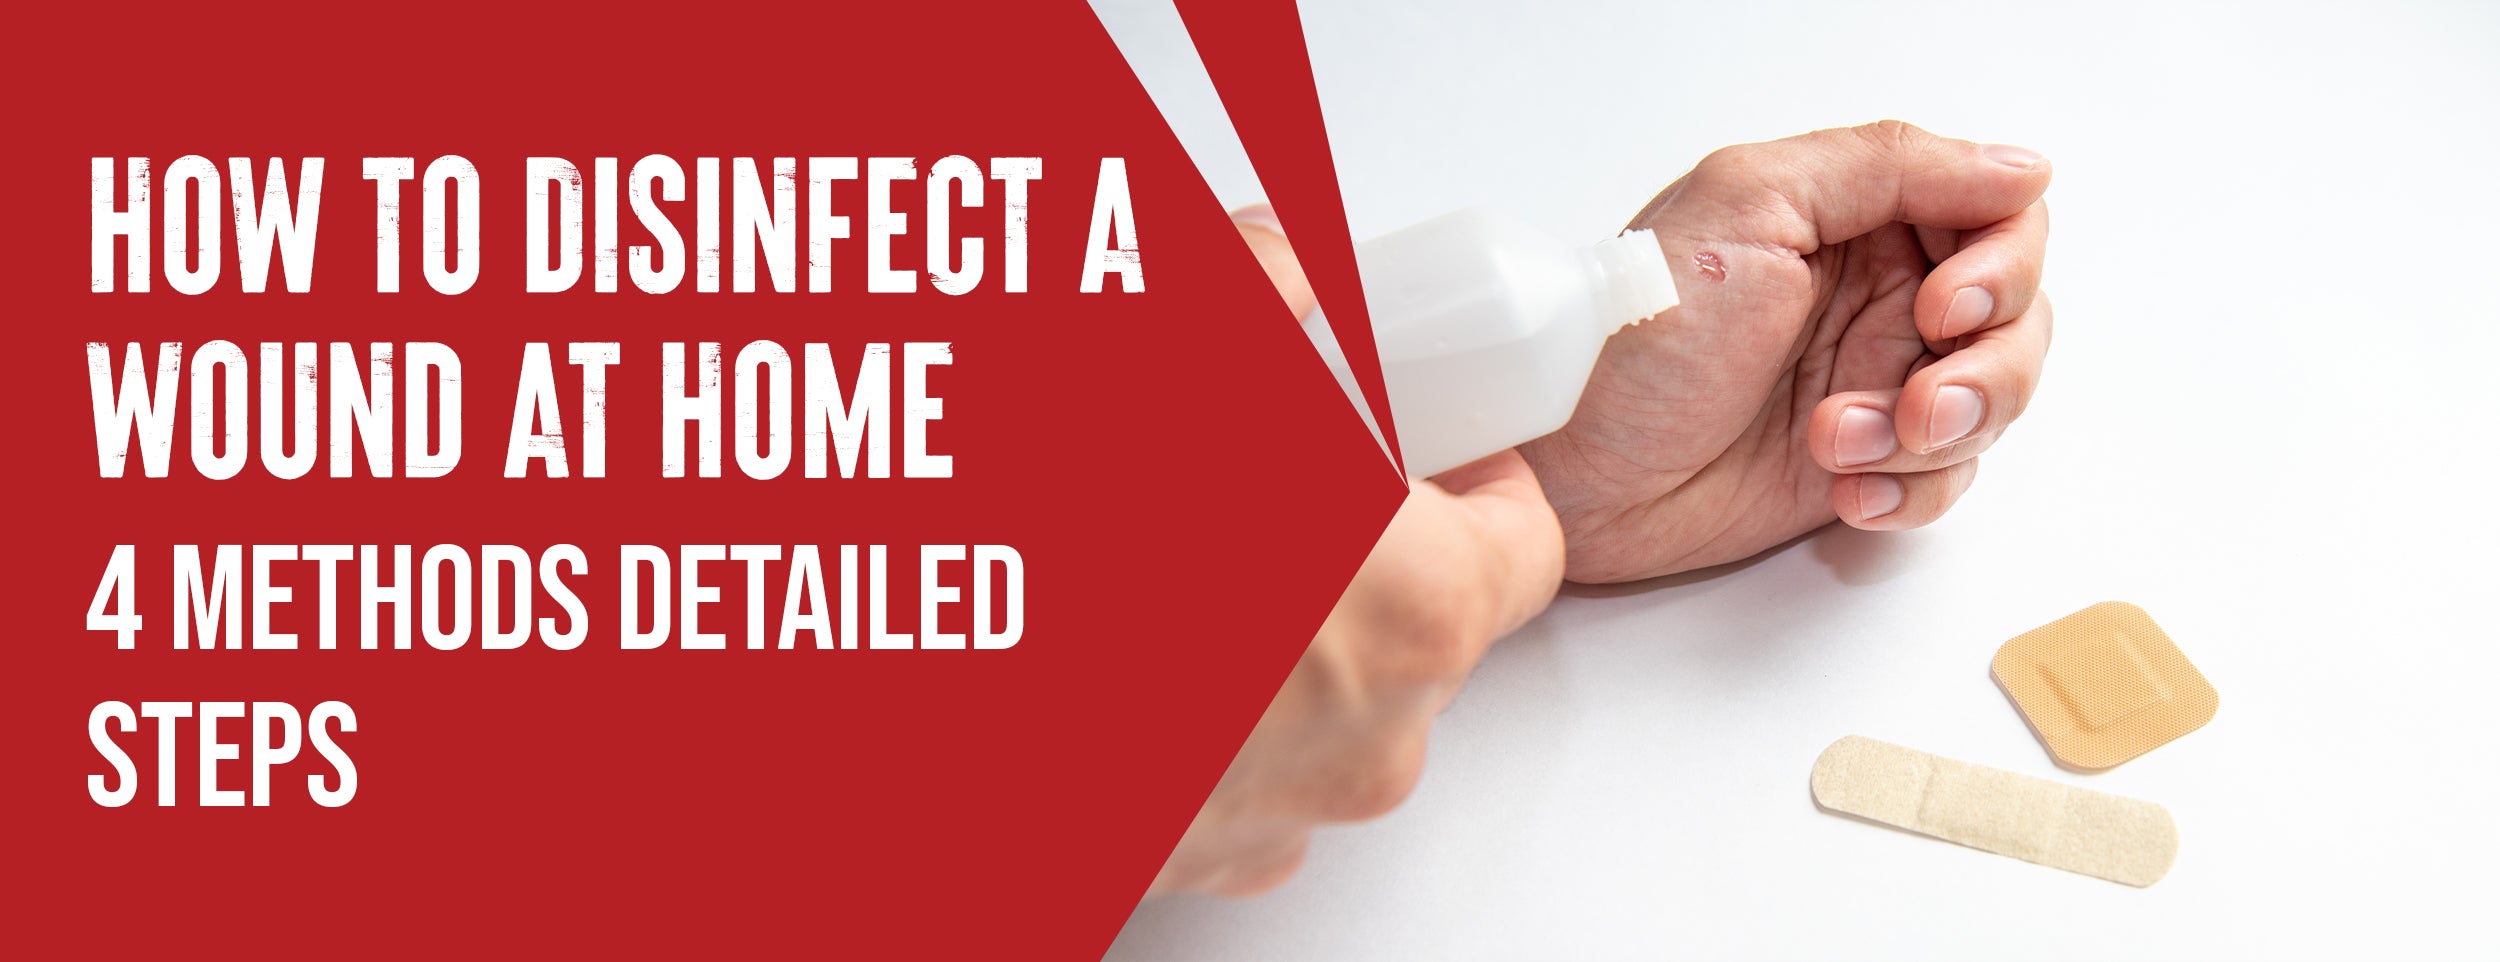 Step-by-Step Guide to Disinfecting Wounds at Home